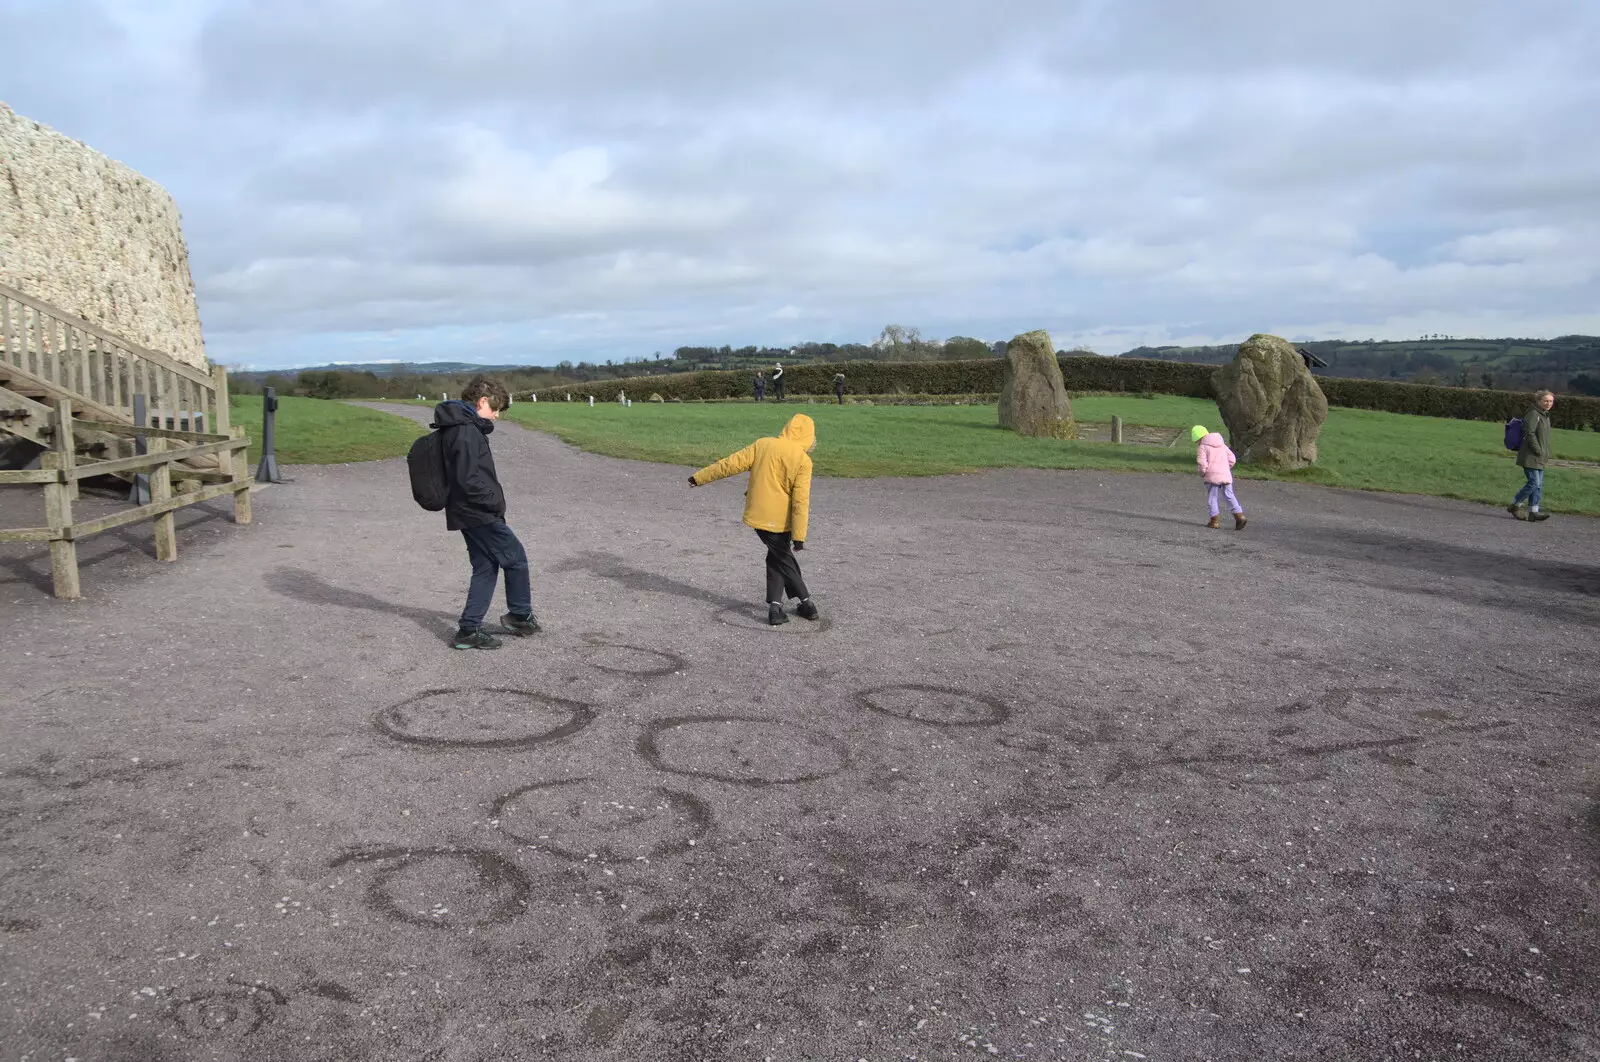 Fred and Harry make their own circles, from Blackrock North and Newgrange, County Louth, Ireland - 16th February 2023